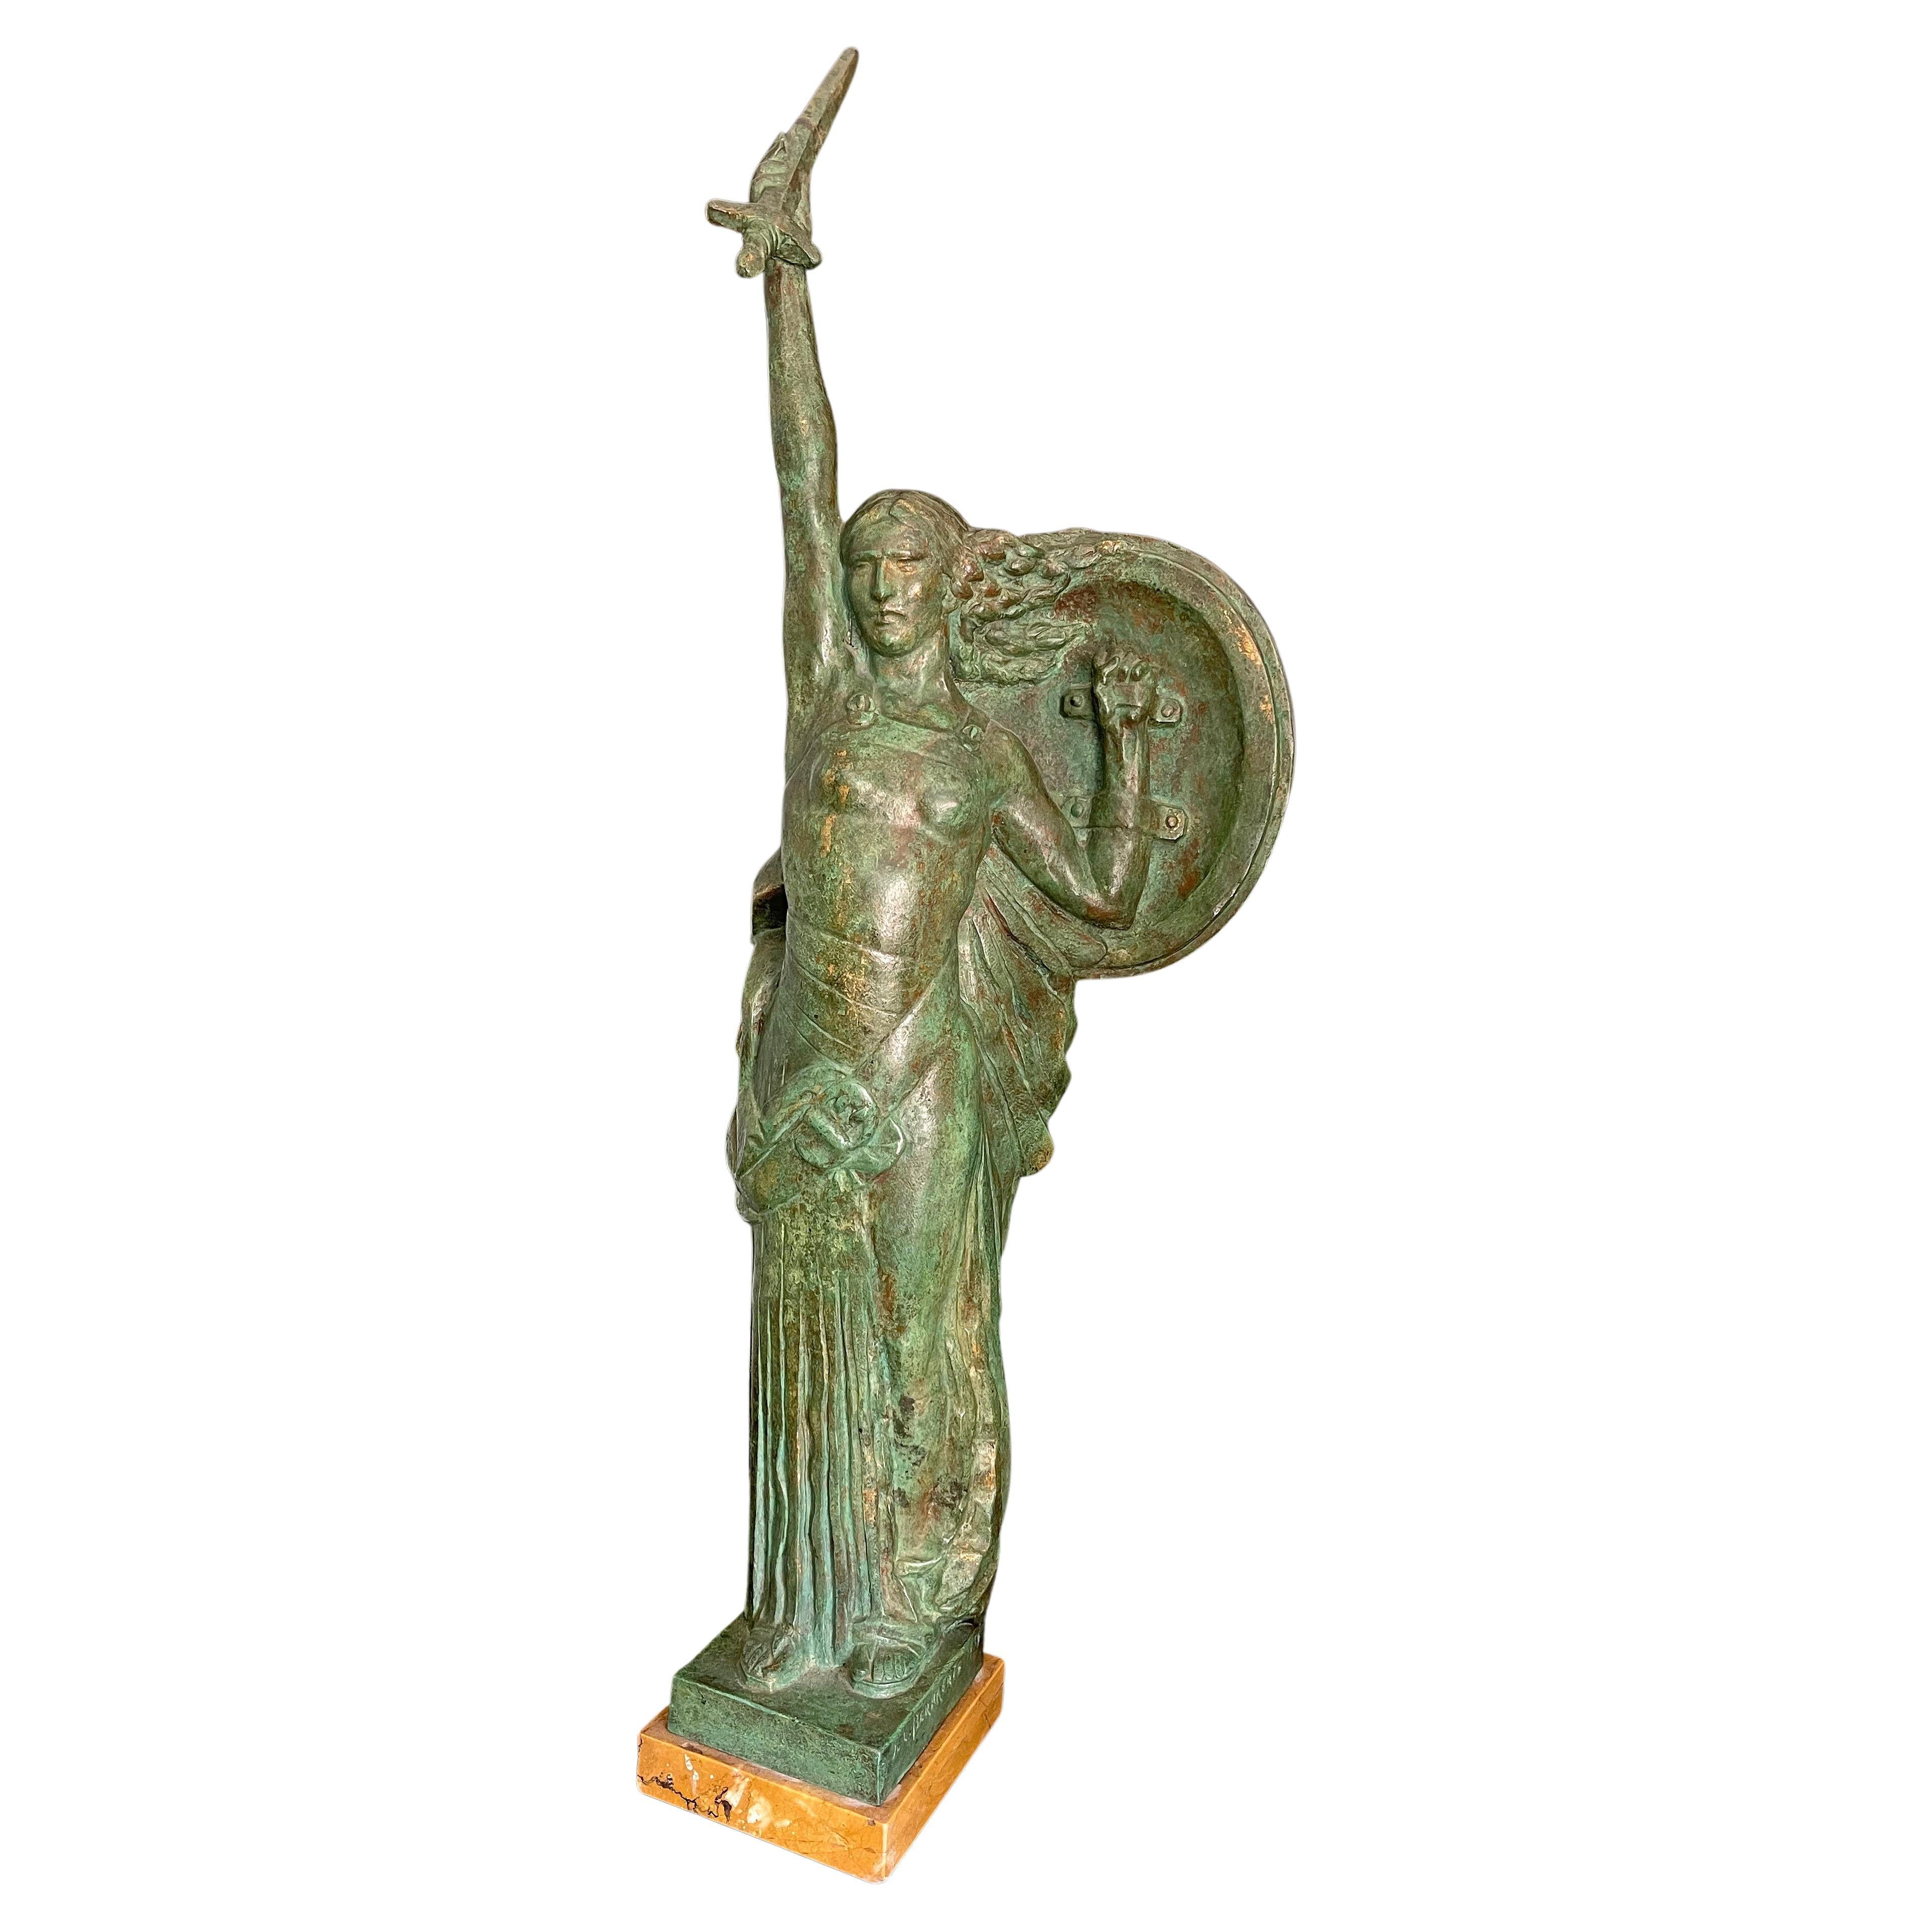 Rare and striking, this bold, bronze allegorical sculpture is entitled 